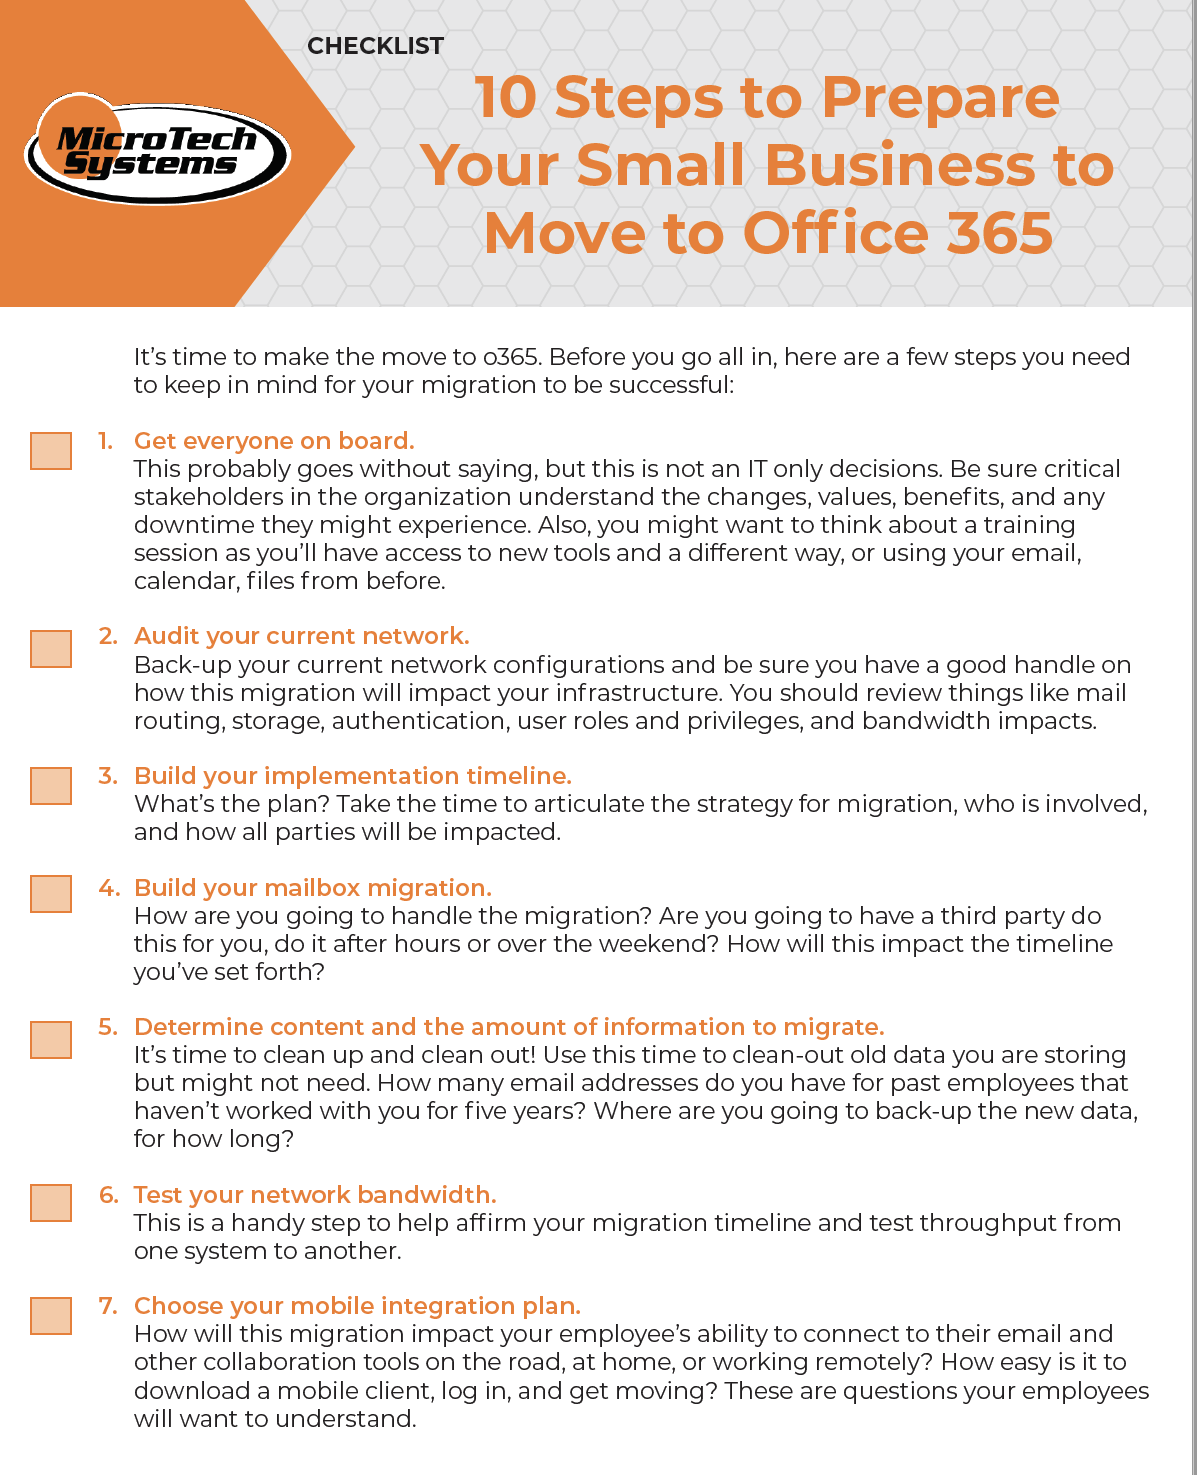 Make the Move to Office 365 for Your Small Business